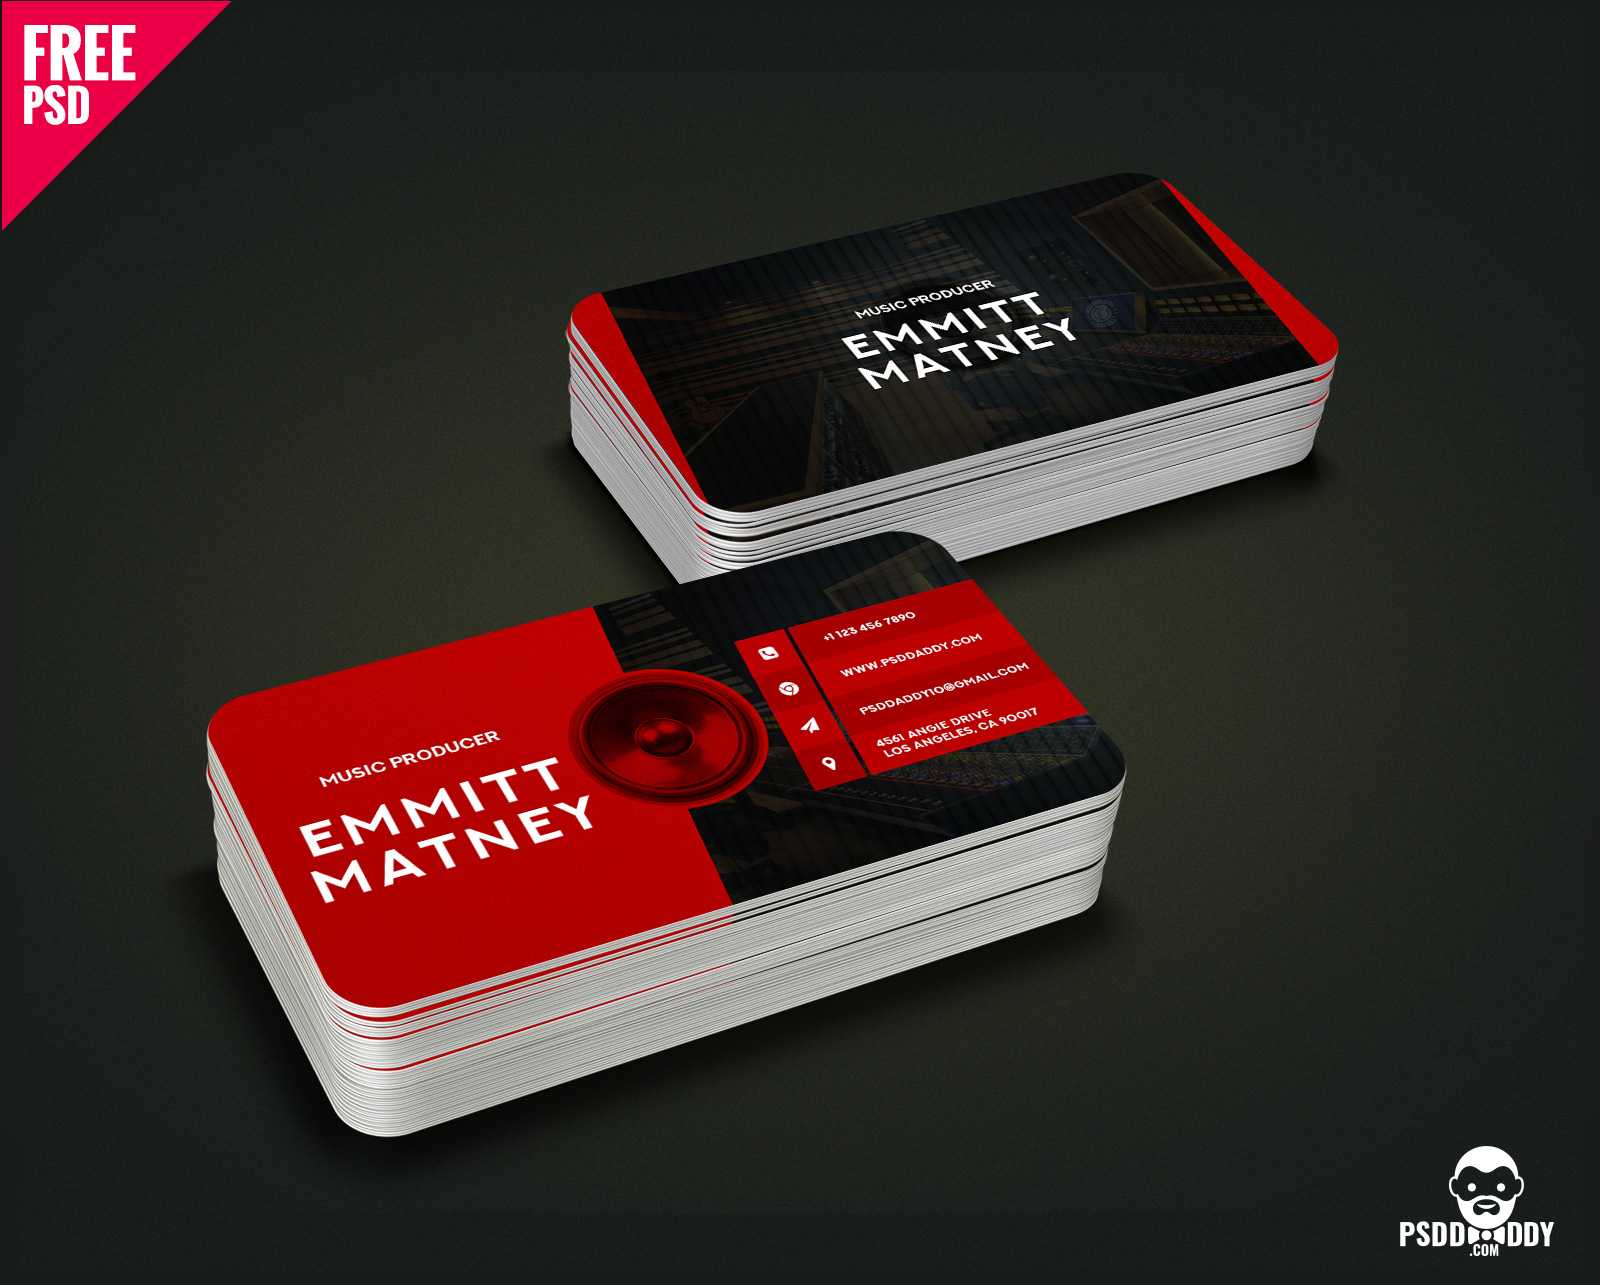 Download] Music Visiting Card Free Psd | Psddaddy For Visiting Card Template Psd Free Download